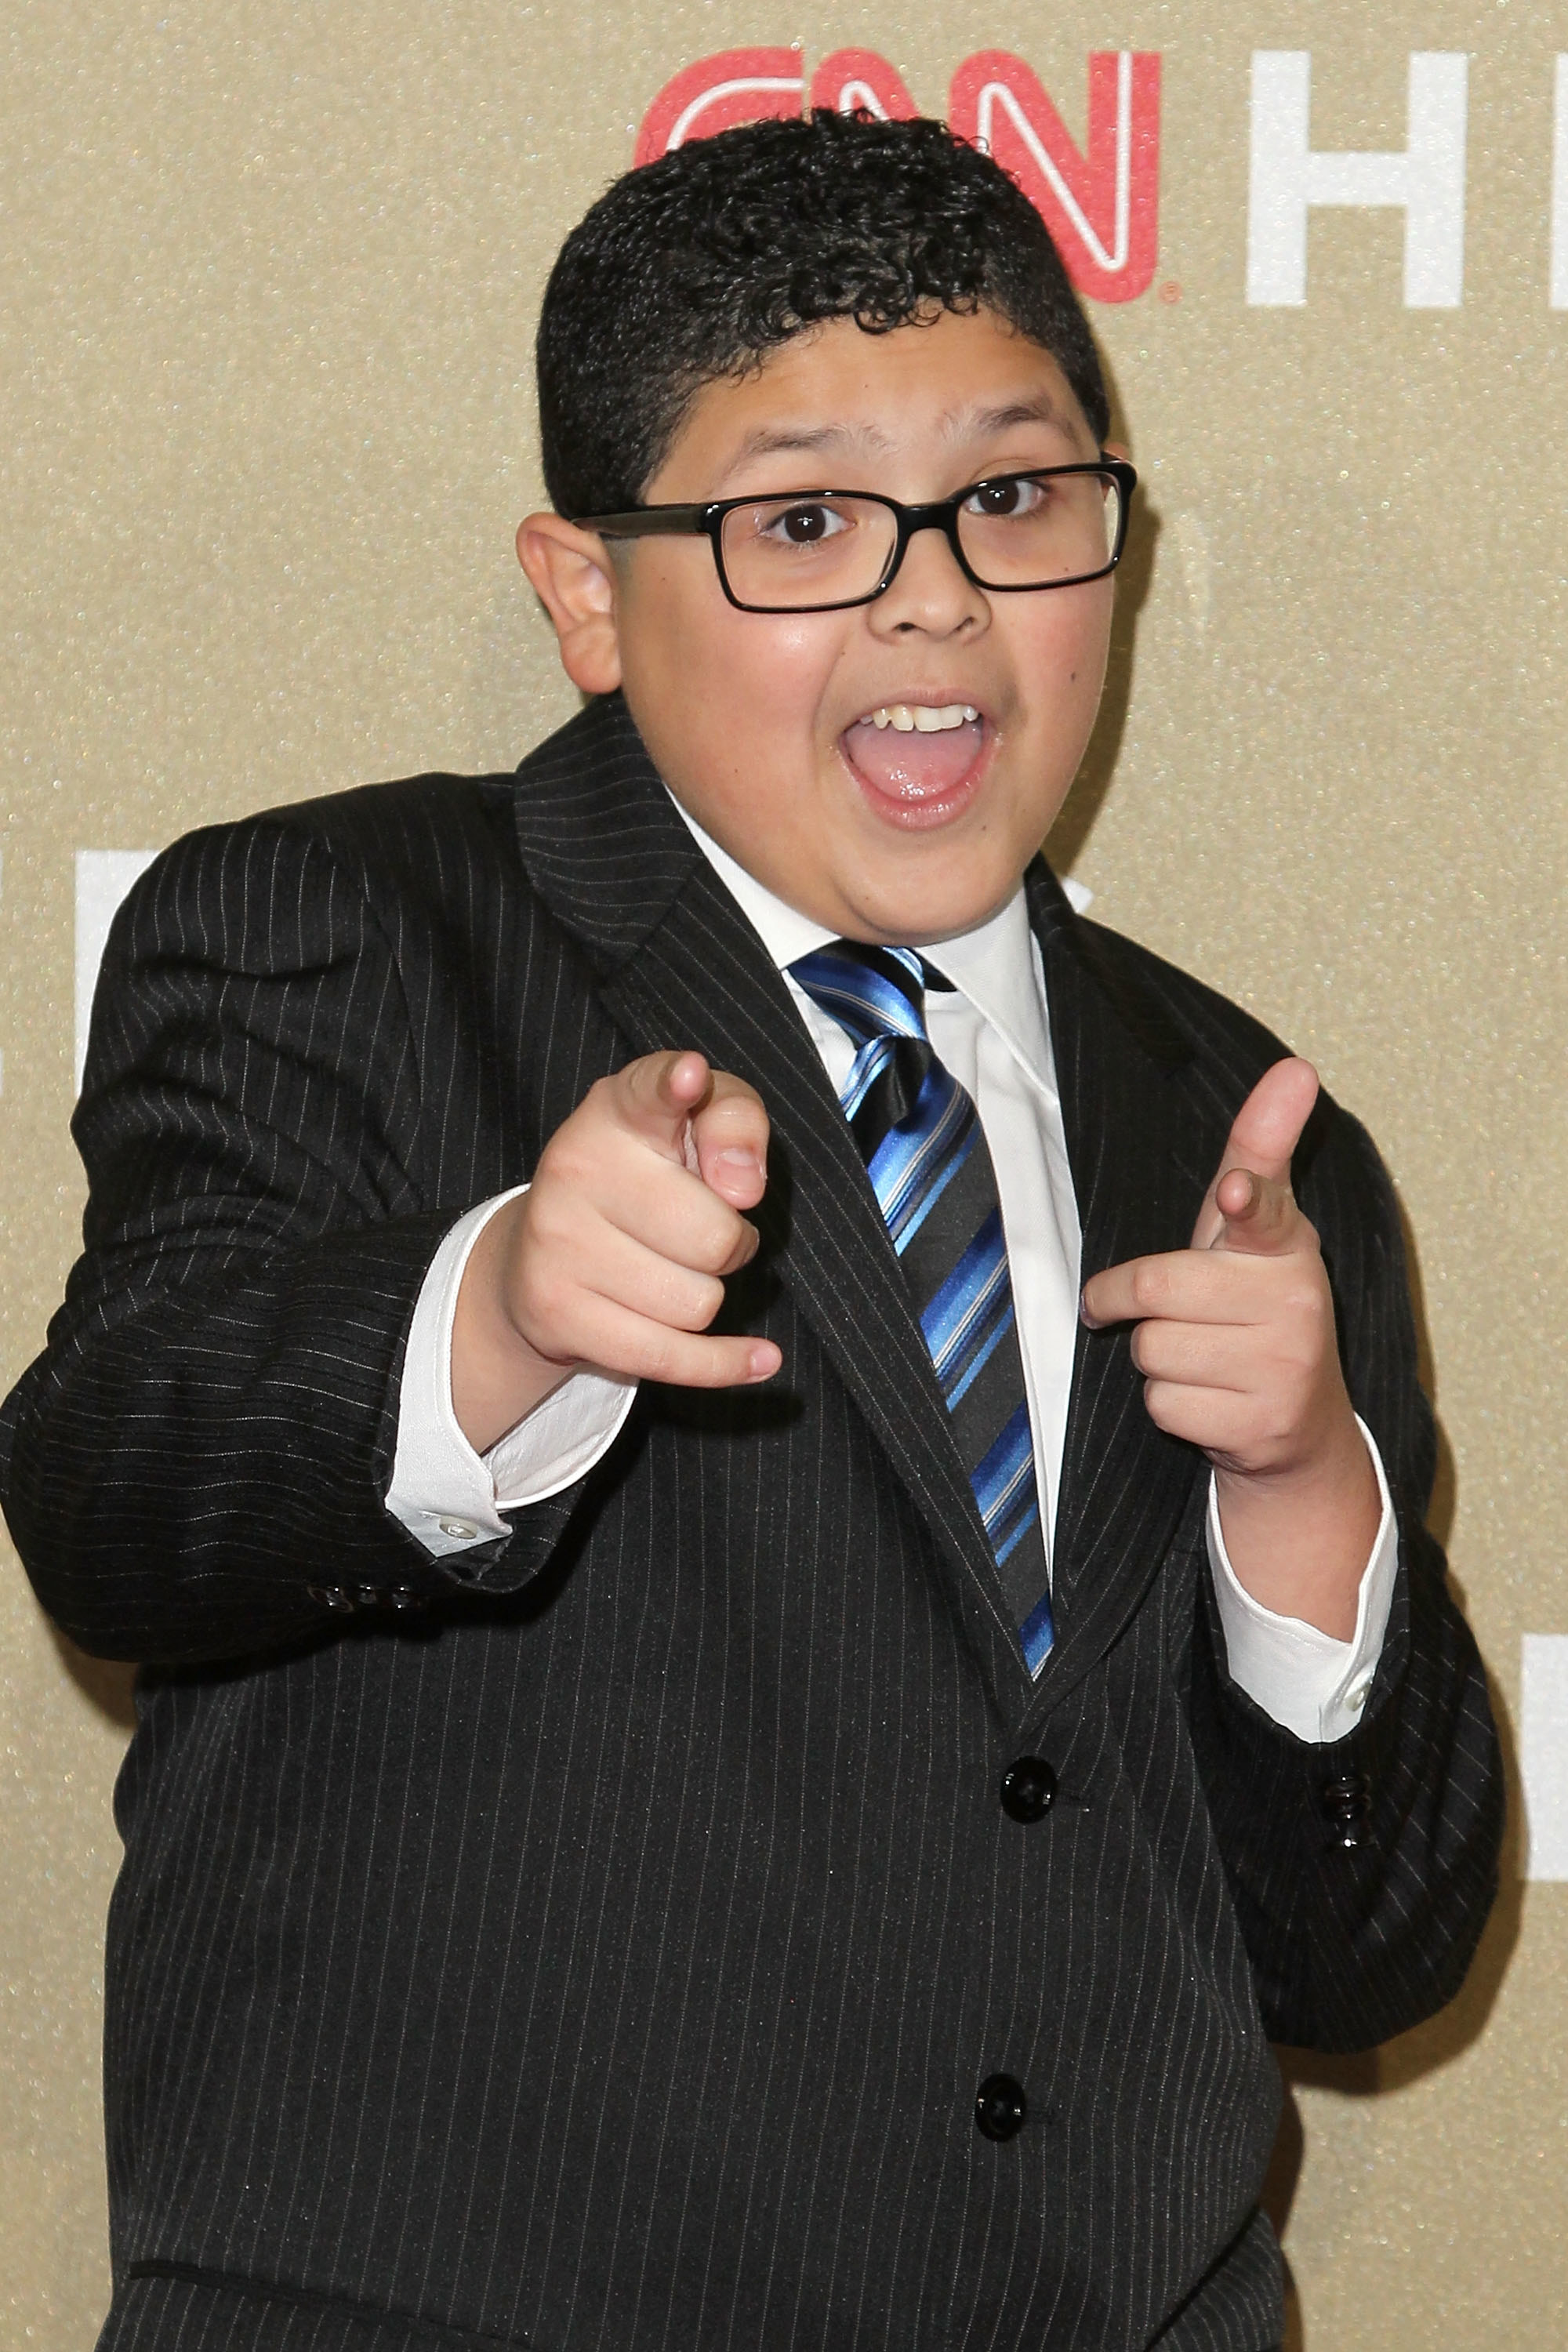 Rico wearing eyeglasses and a suit pointing finger guns at the camera